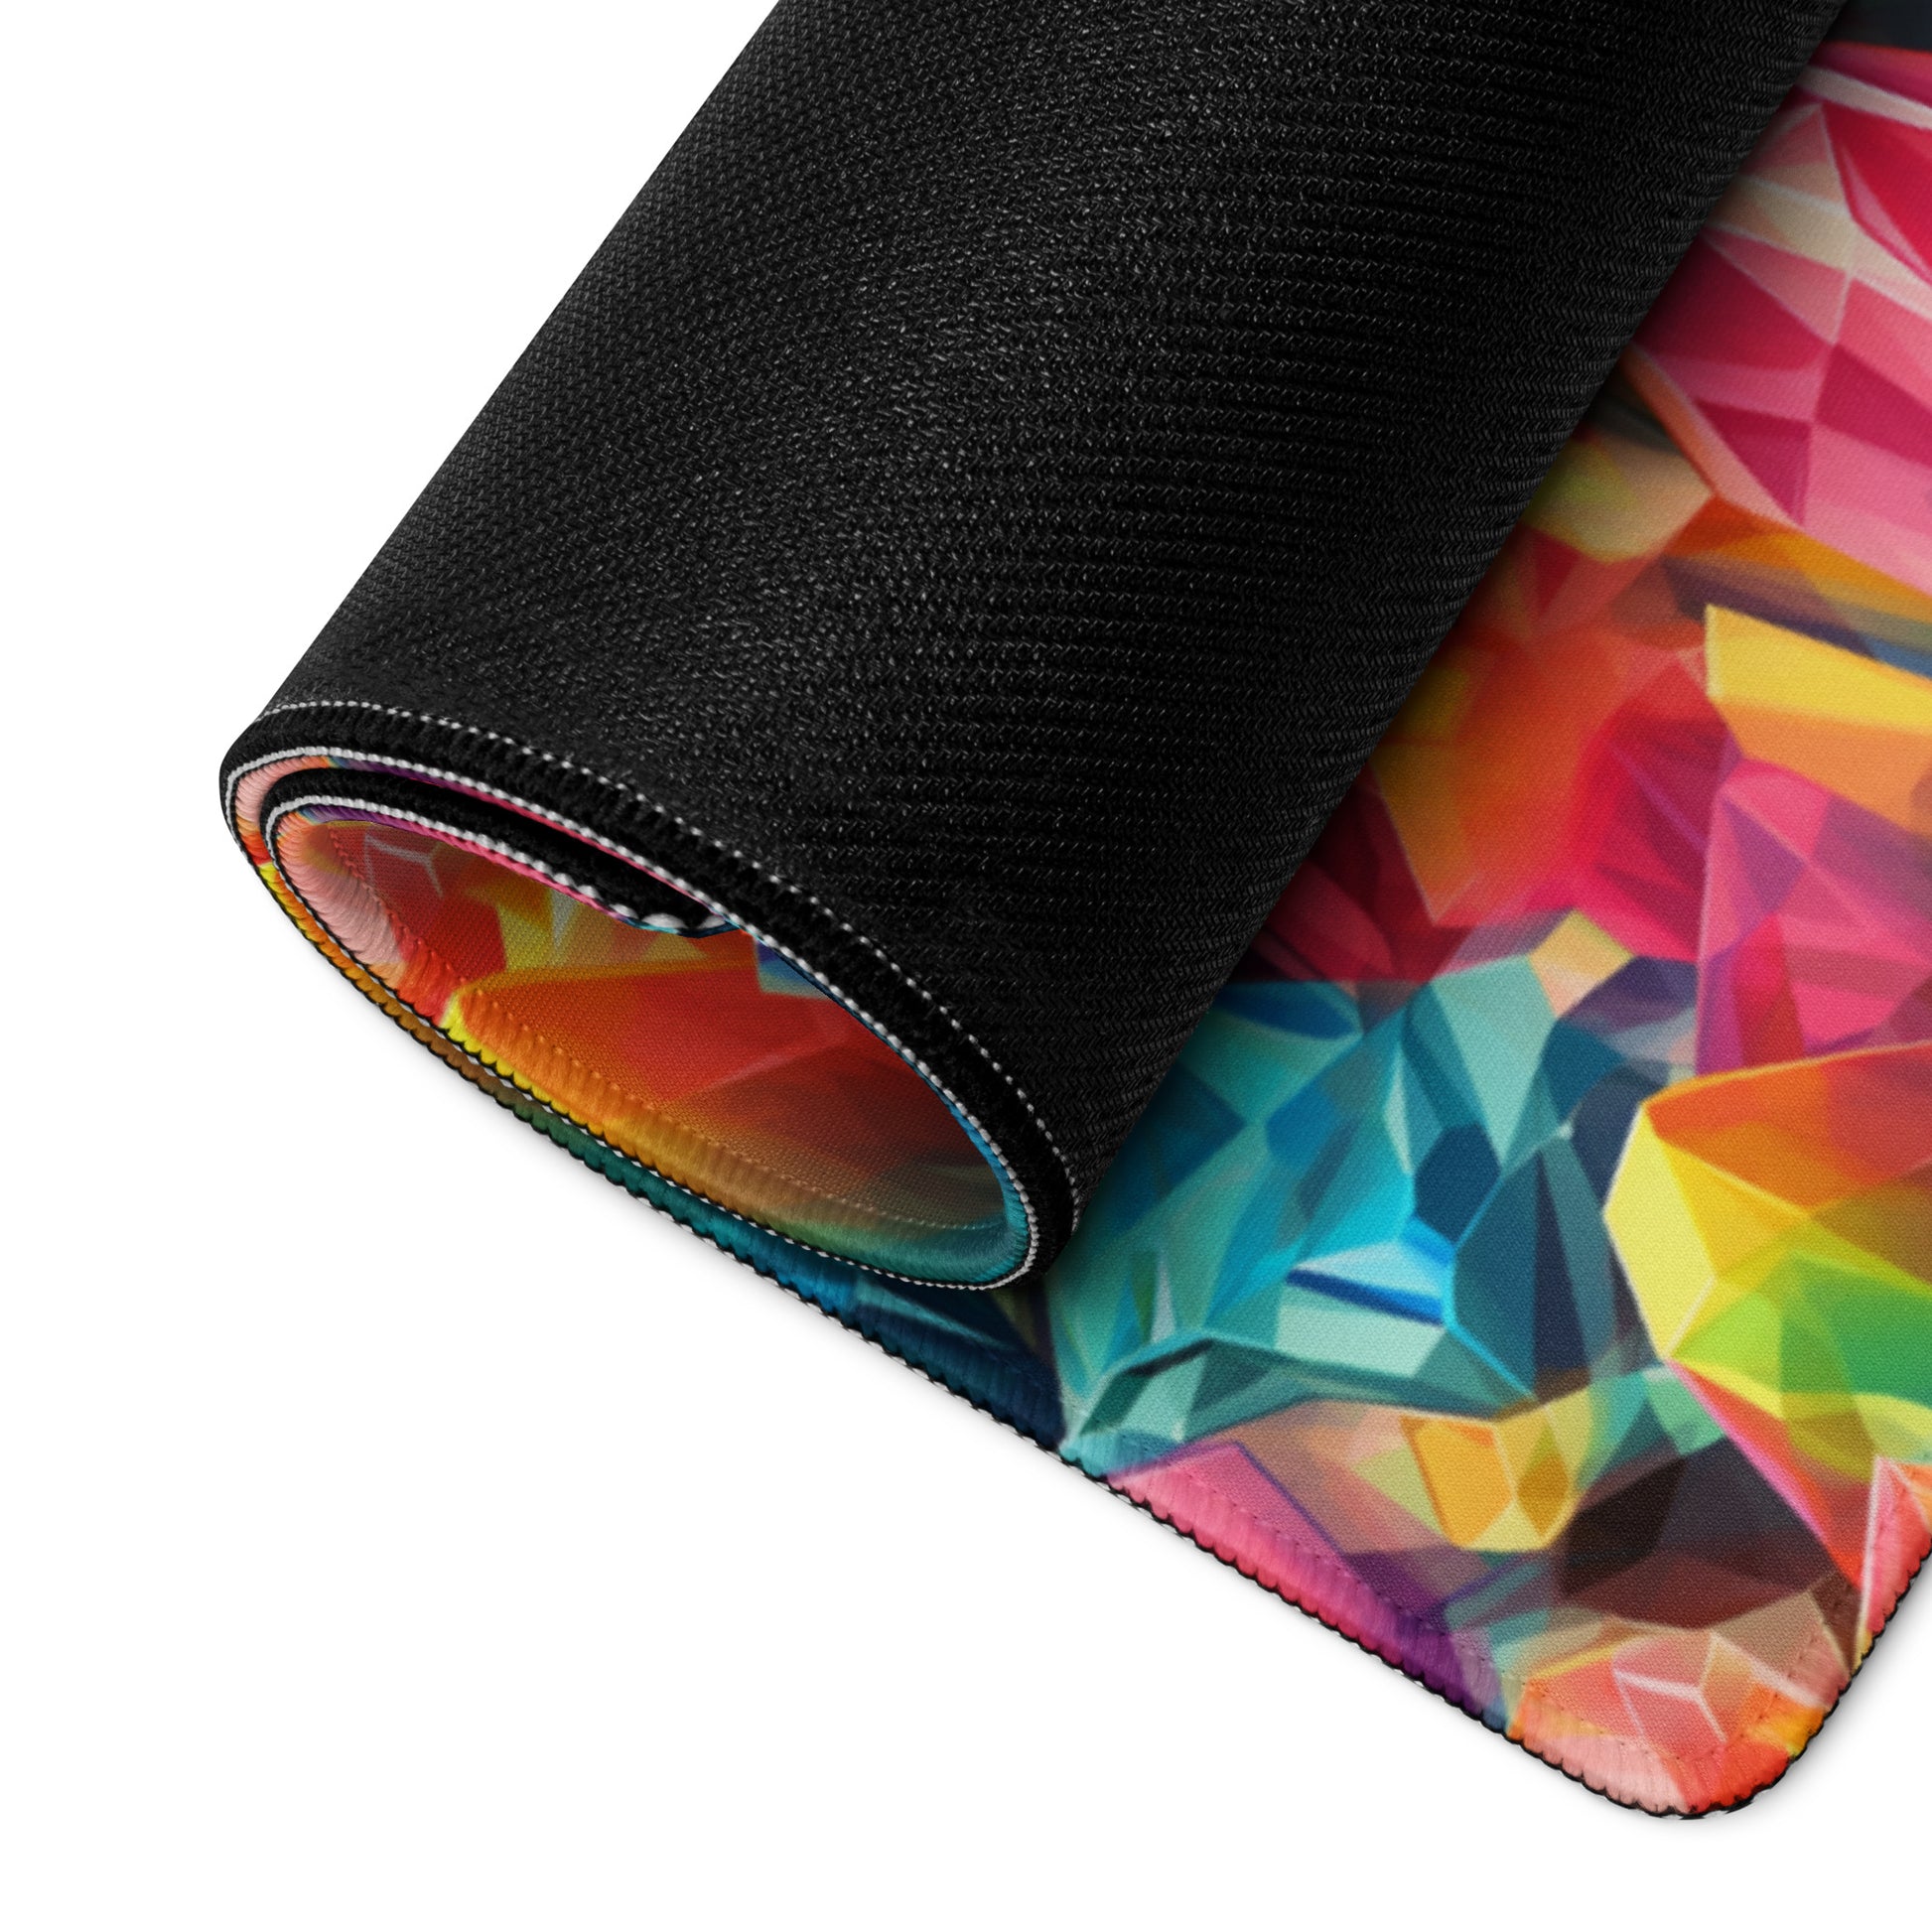 A rainbow crystal gaming desk pad rolled up.